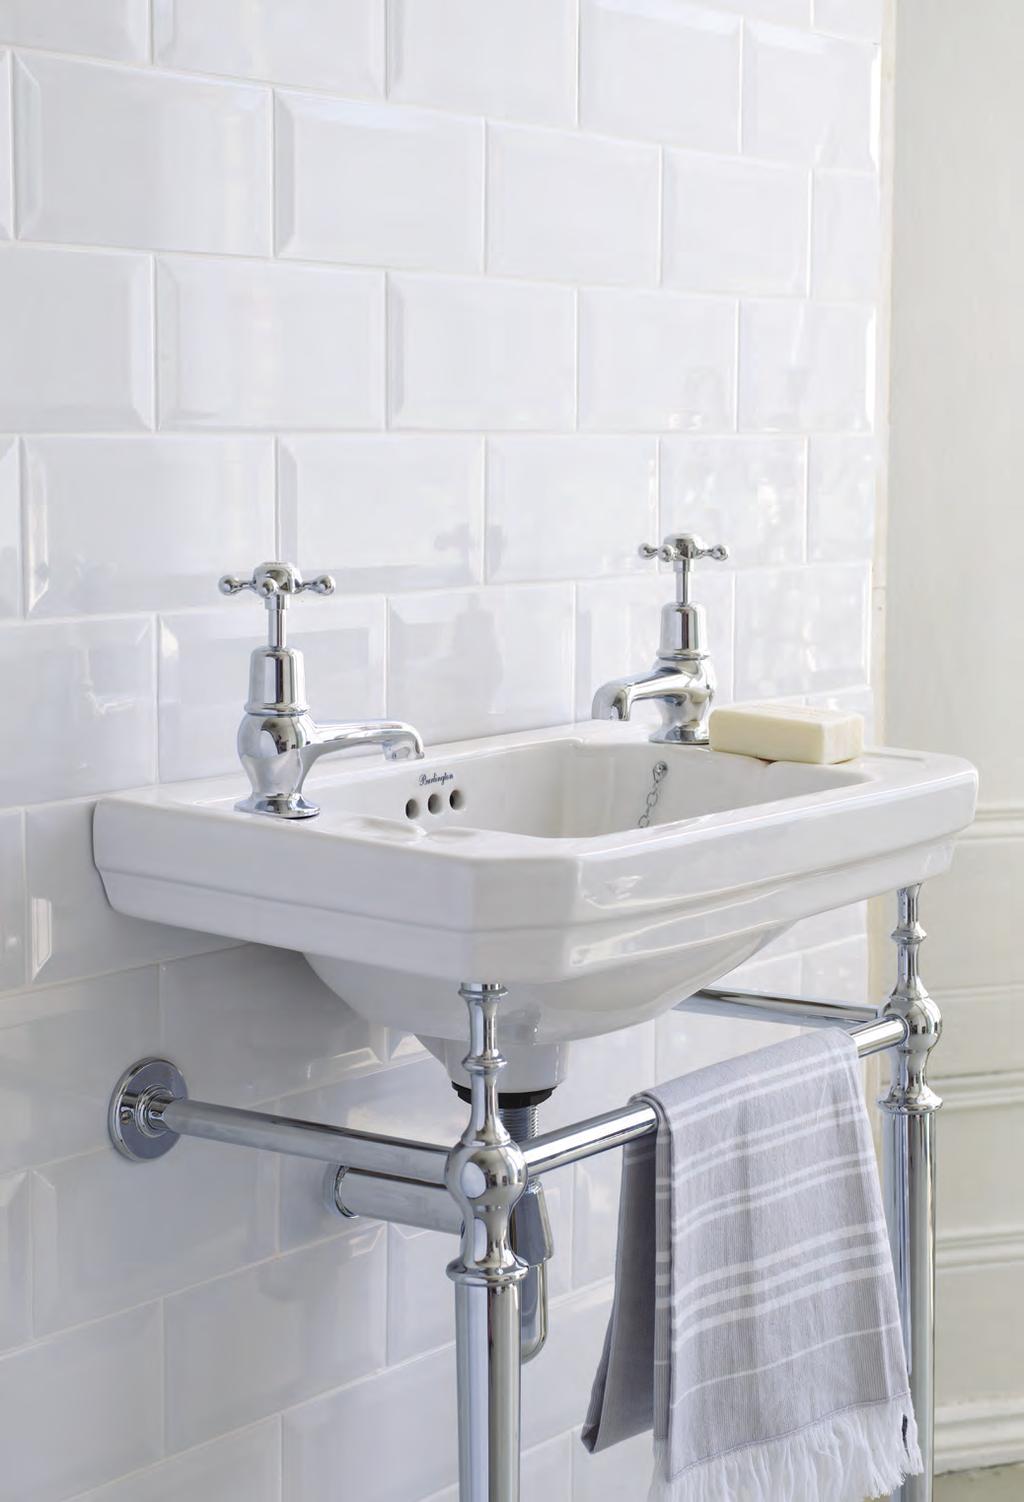 CLOAKROOM BASINS Cloakroom basins Throughout the Burlington range of stunning ceramic styles, a selection of cloakroom options have been crafted so